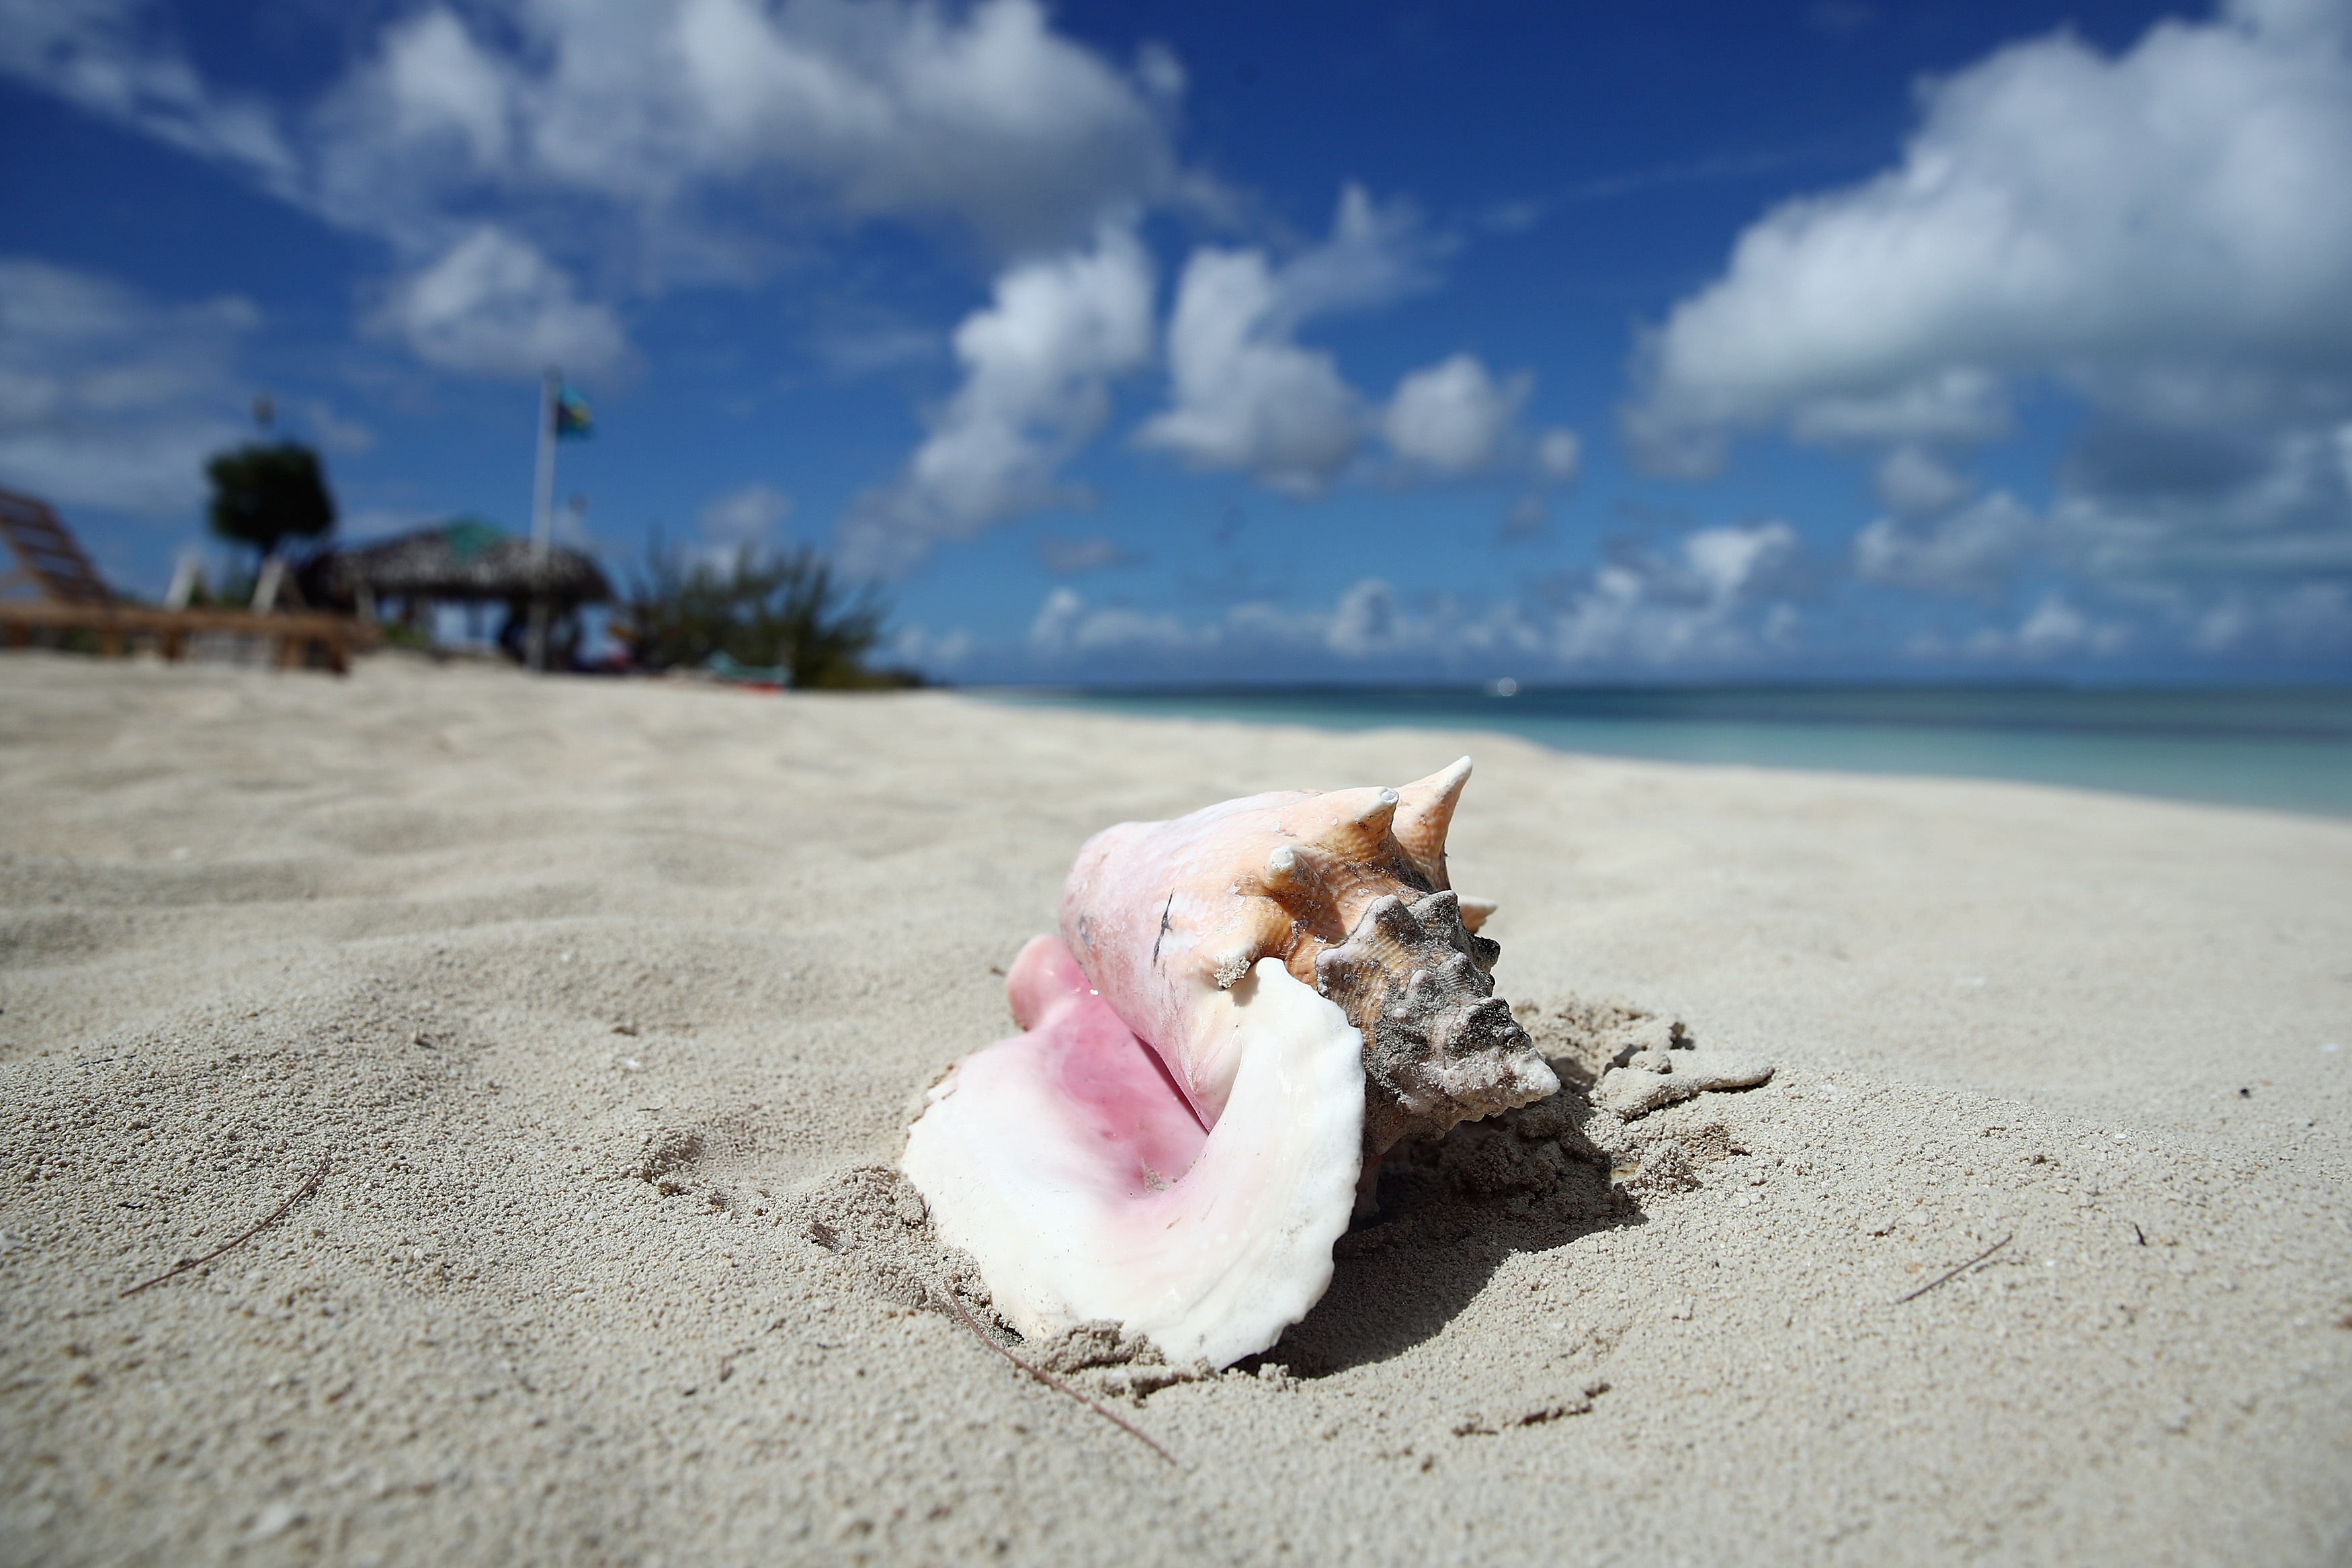 A shell lies on a white sand beach in this glamour shot of the Bahamas